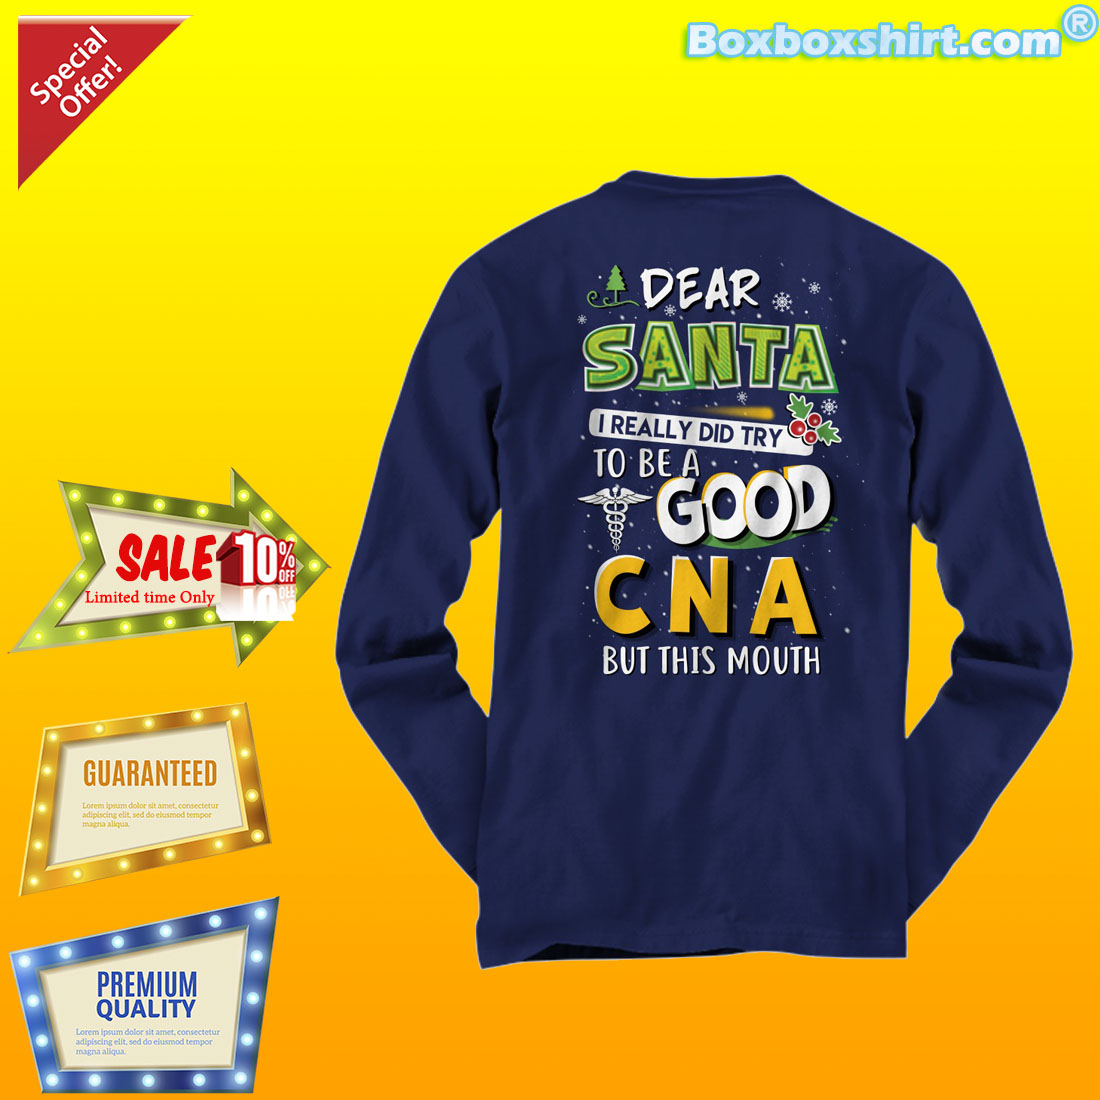 Dear santa I really did try to be a good CNA but this mouth shirt